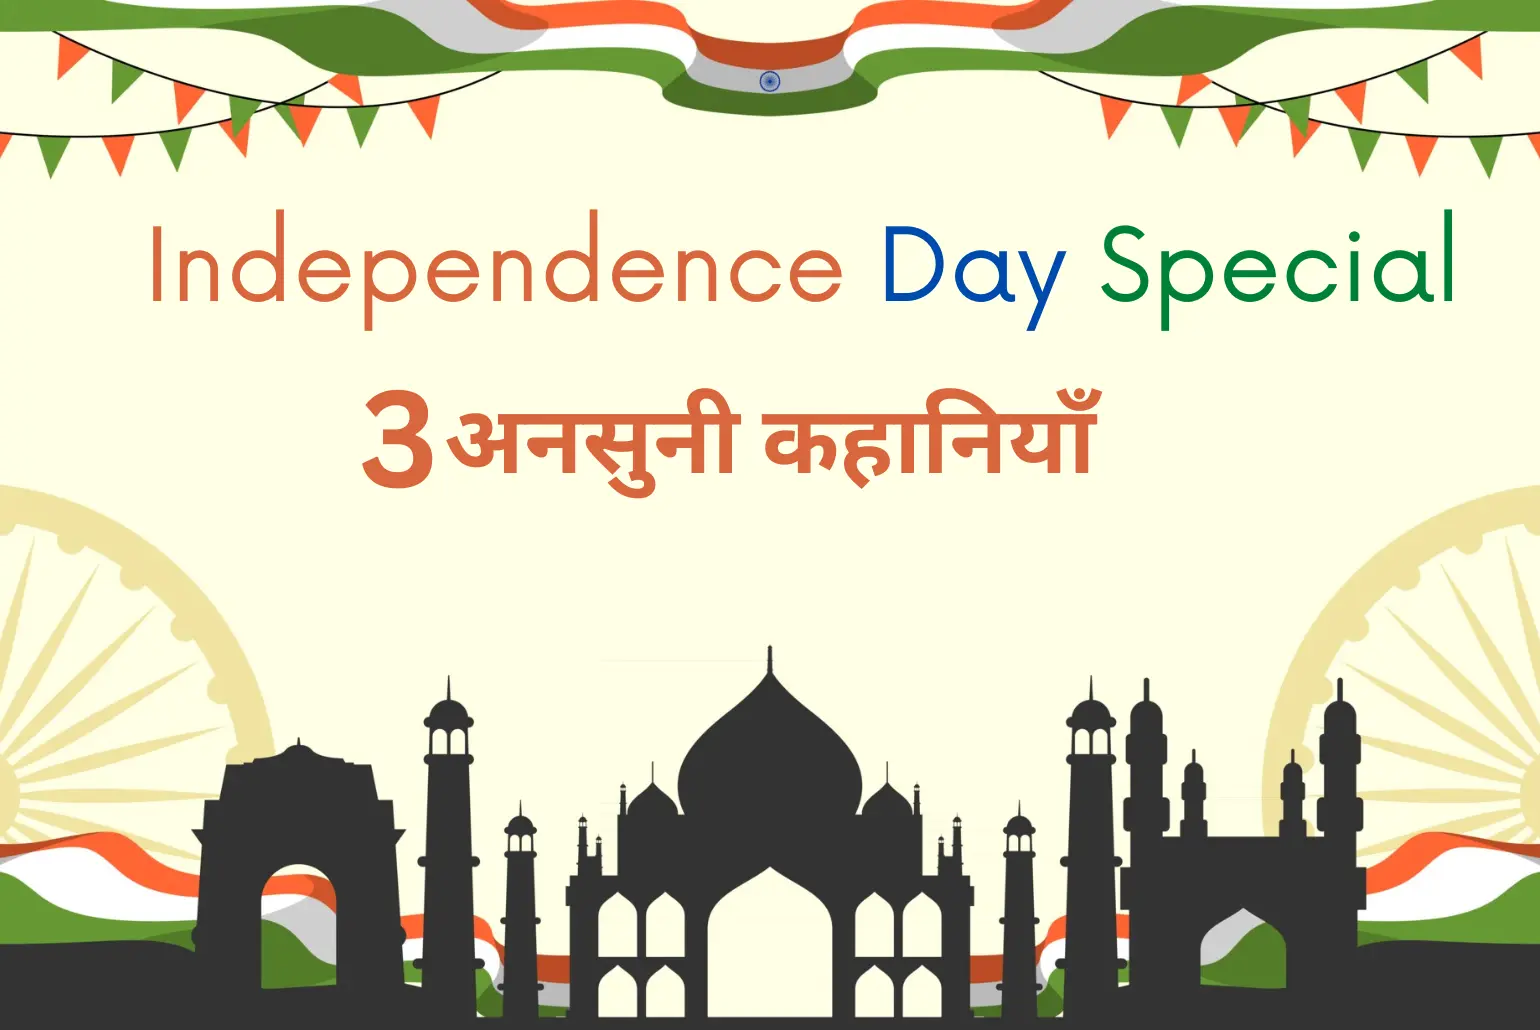 Independence Day Special - 3 unheard stories